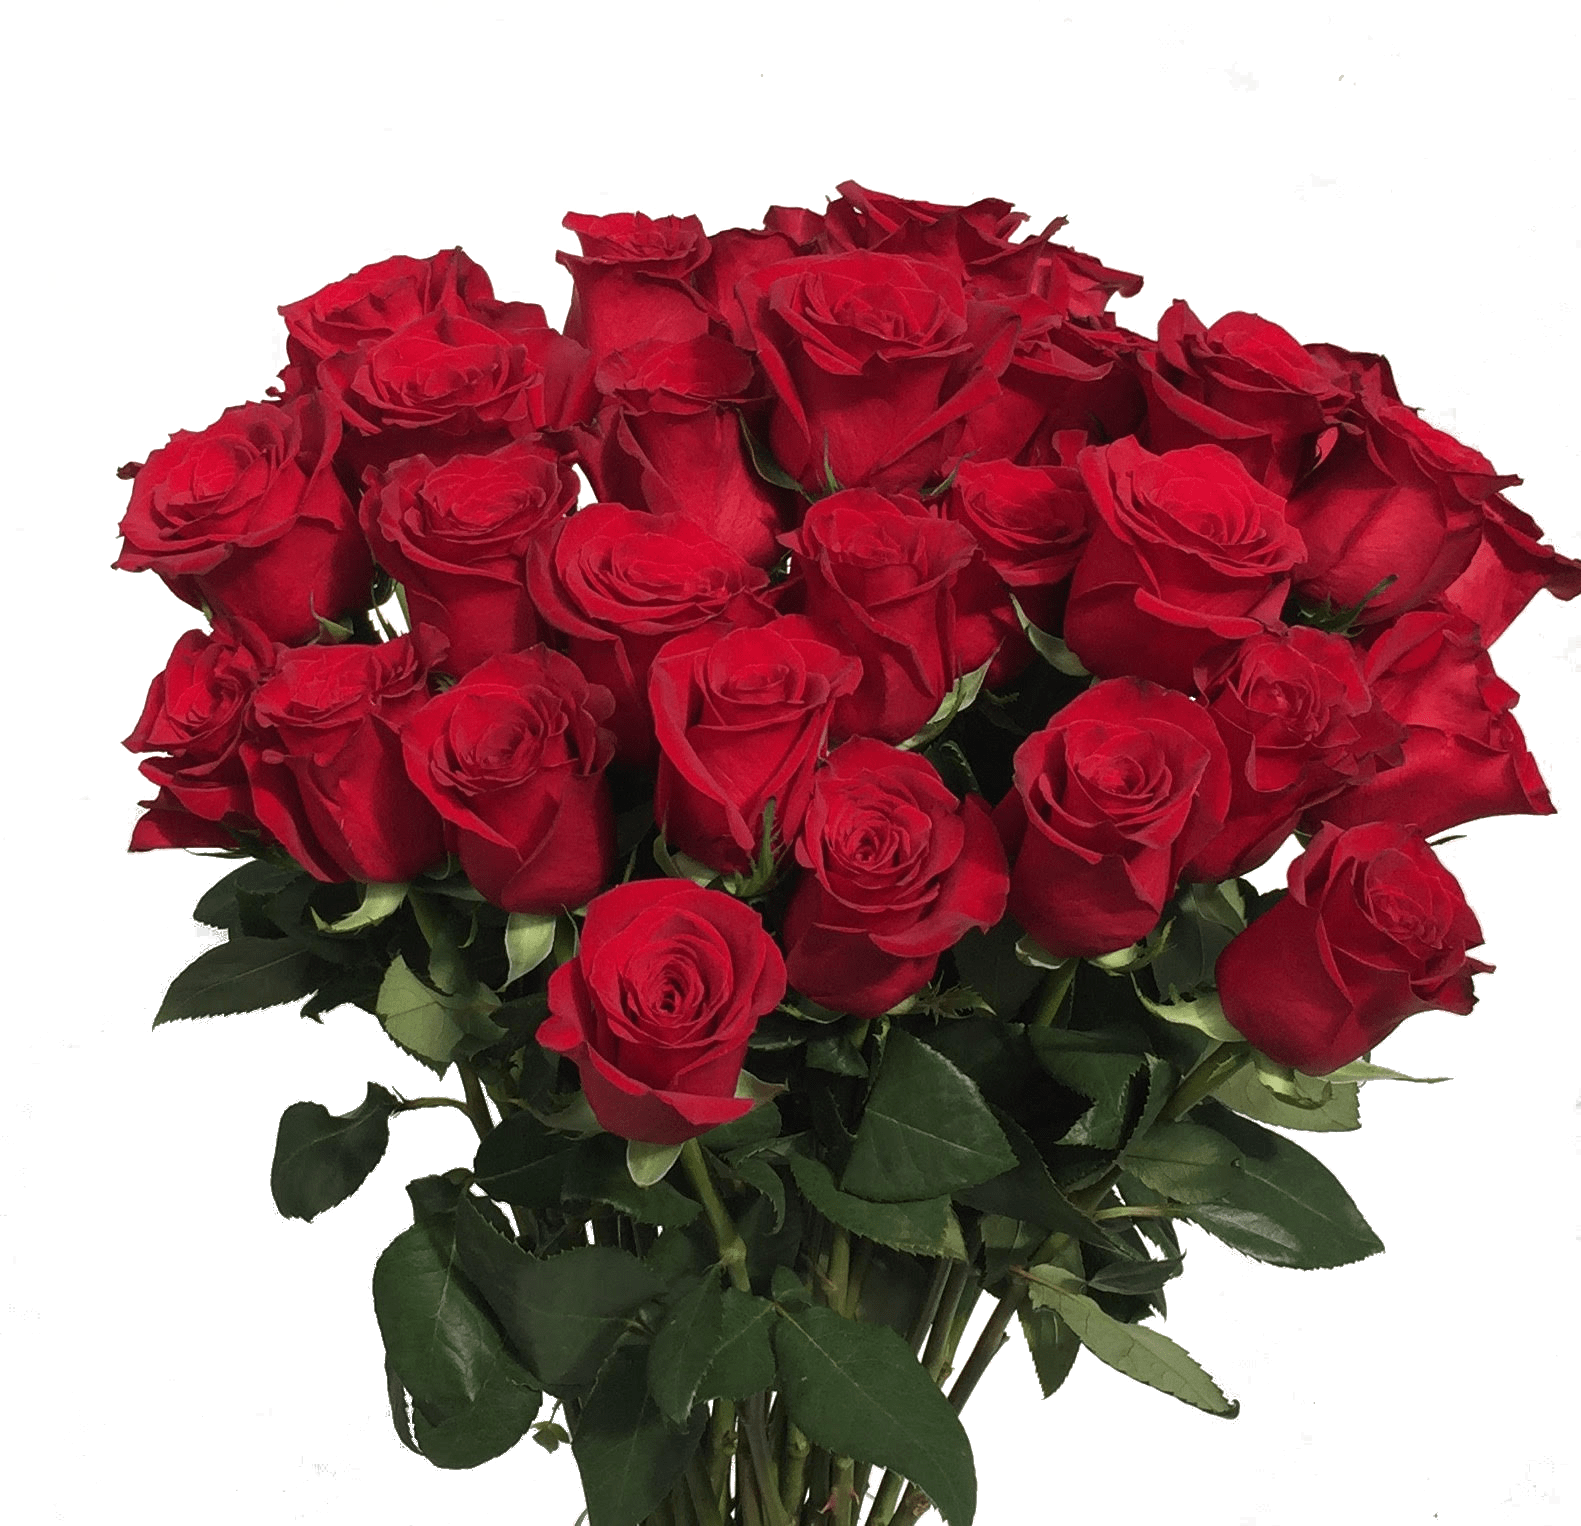 2 Dozen Ecuadorian Freedom Roses Vased - Red is for **Love** and what better way to show your love then sending the best quality long stem roses available.  This design includes 24 Red roses in a clear glass vase with premium greens, such as Eucalyptus, Italian Ruscus (Depending on availability &amp; Season)   About our roses: These roses are grown in Ecuador at zero degrees latitude, high in the mountains. This location ensures a bright steady light, and an even growing temperature. These ideal growing conditions ensure these premium roses will have a vase life of 7-14 days.